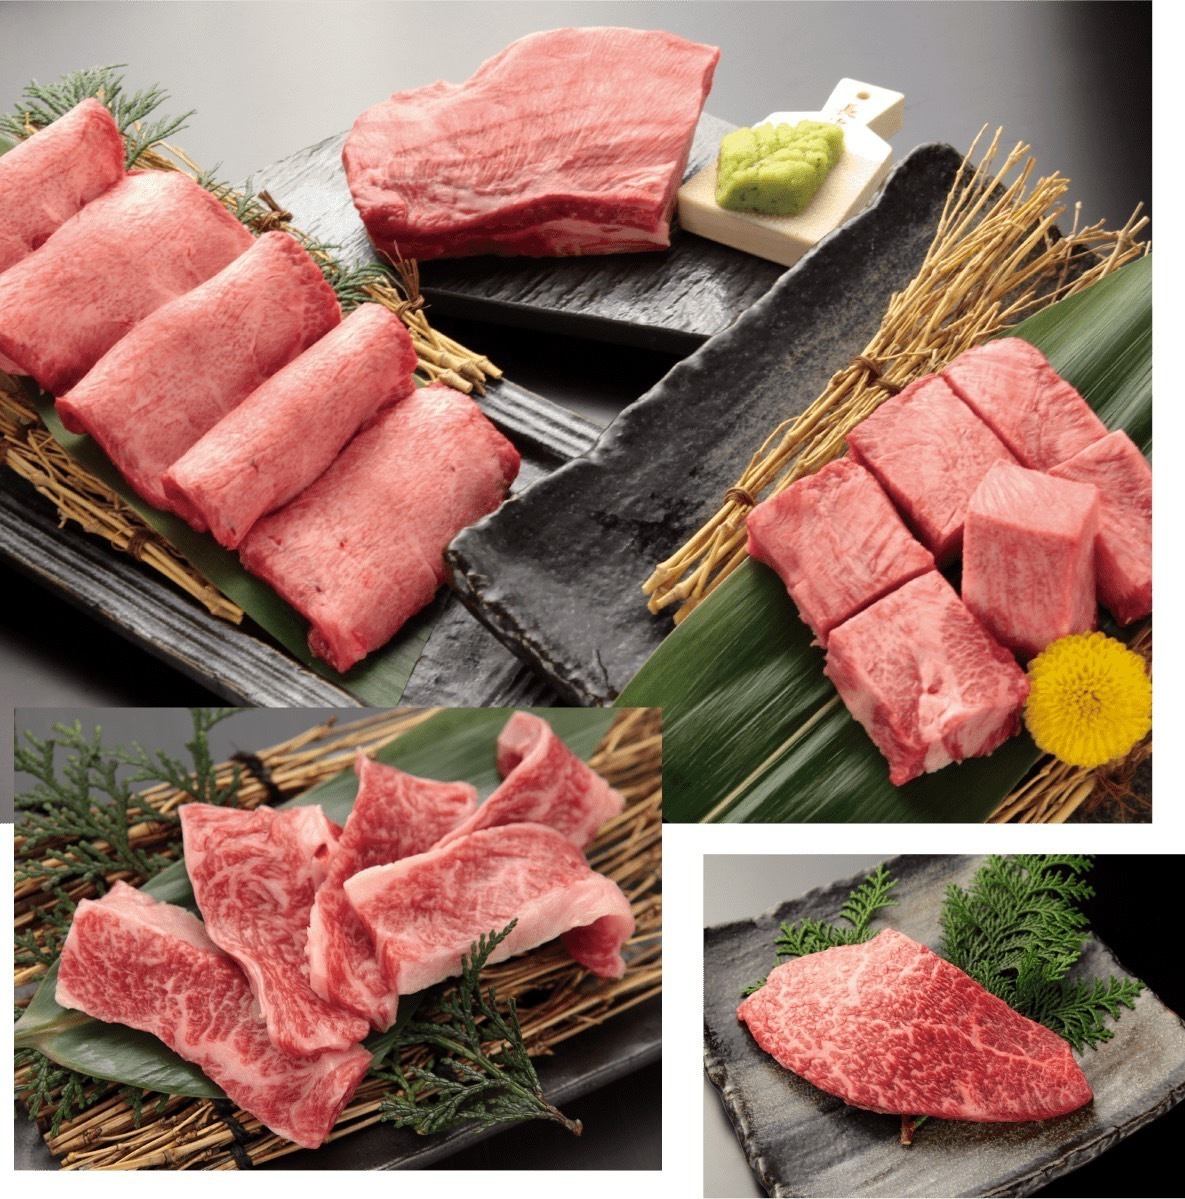 All-you-can-drink from 1,000 yen / All-you-can-eat authentic charcoal-grilled yakiniku, including the popular Tsubo series!